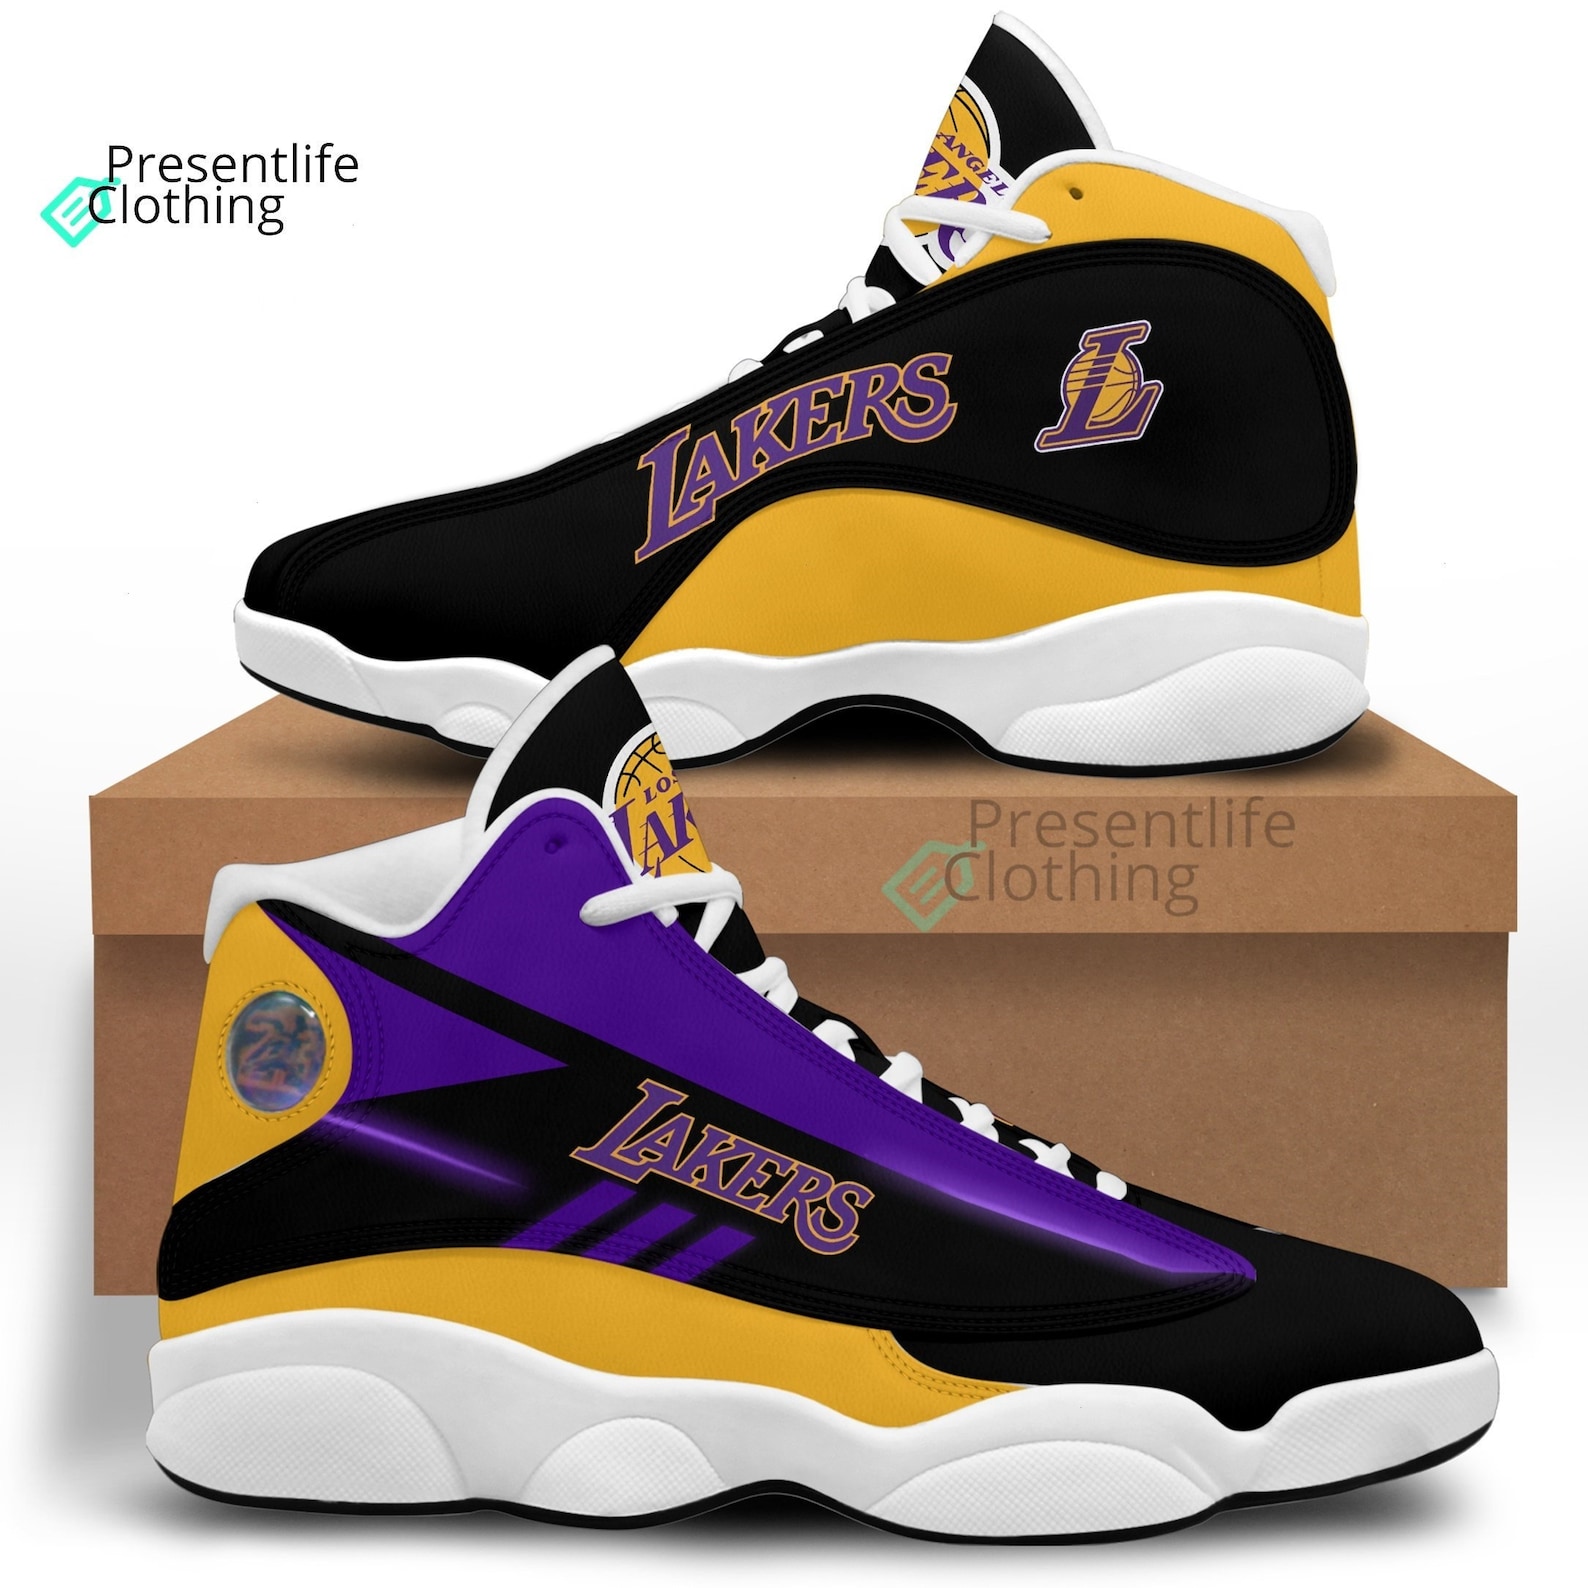 Los Angeles Lakers Air JD13 Sneakers Fan Gift For Basketball | Etsy